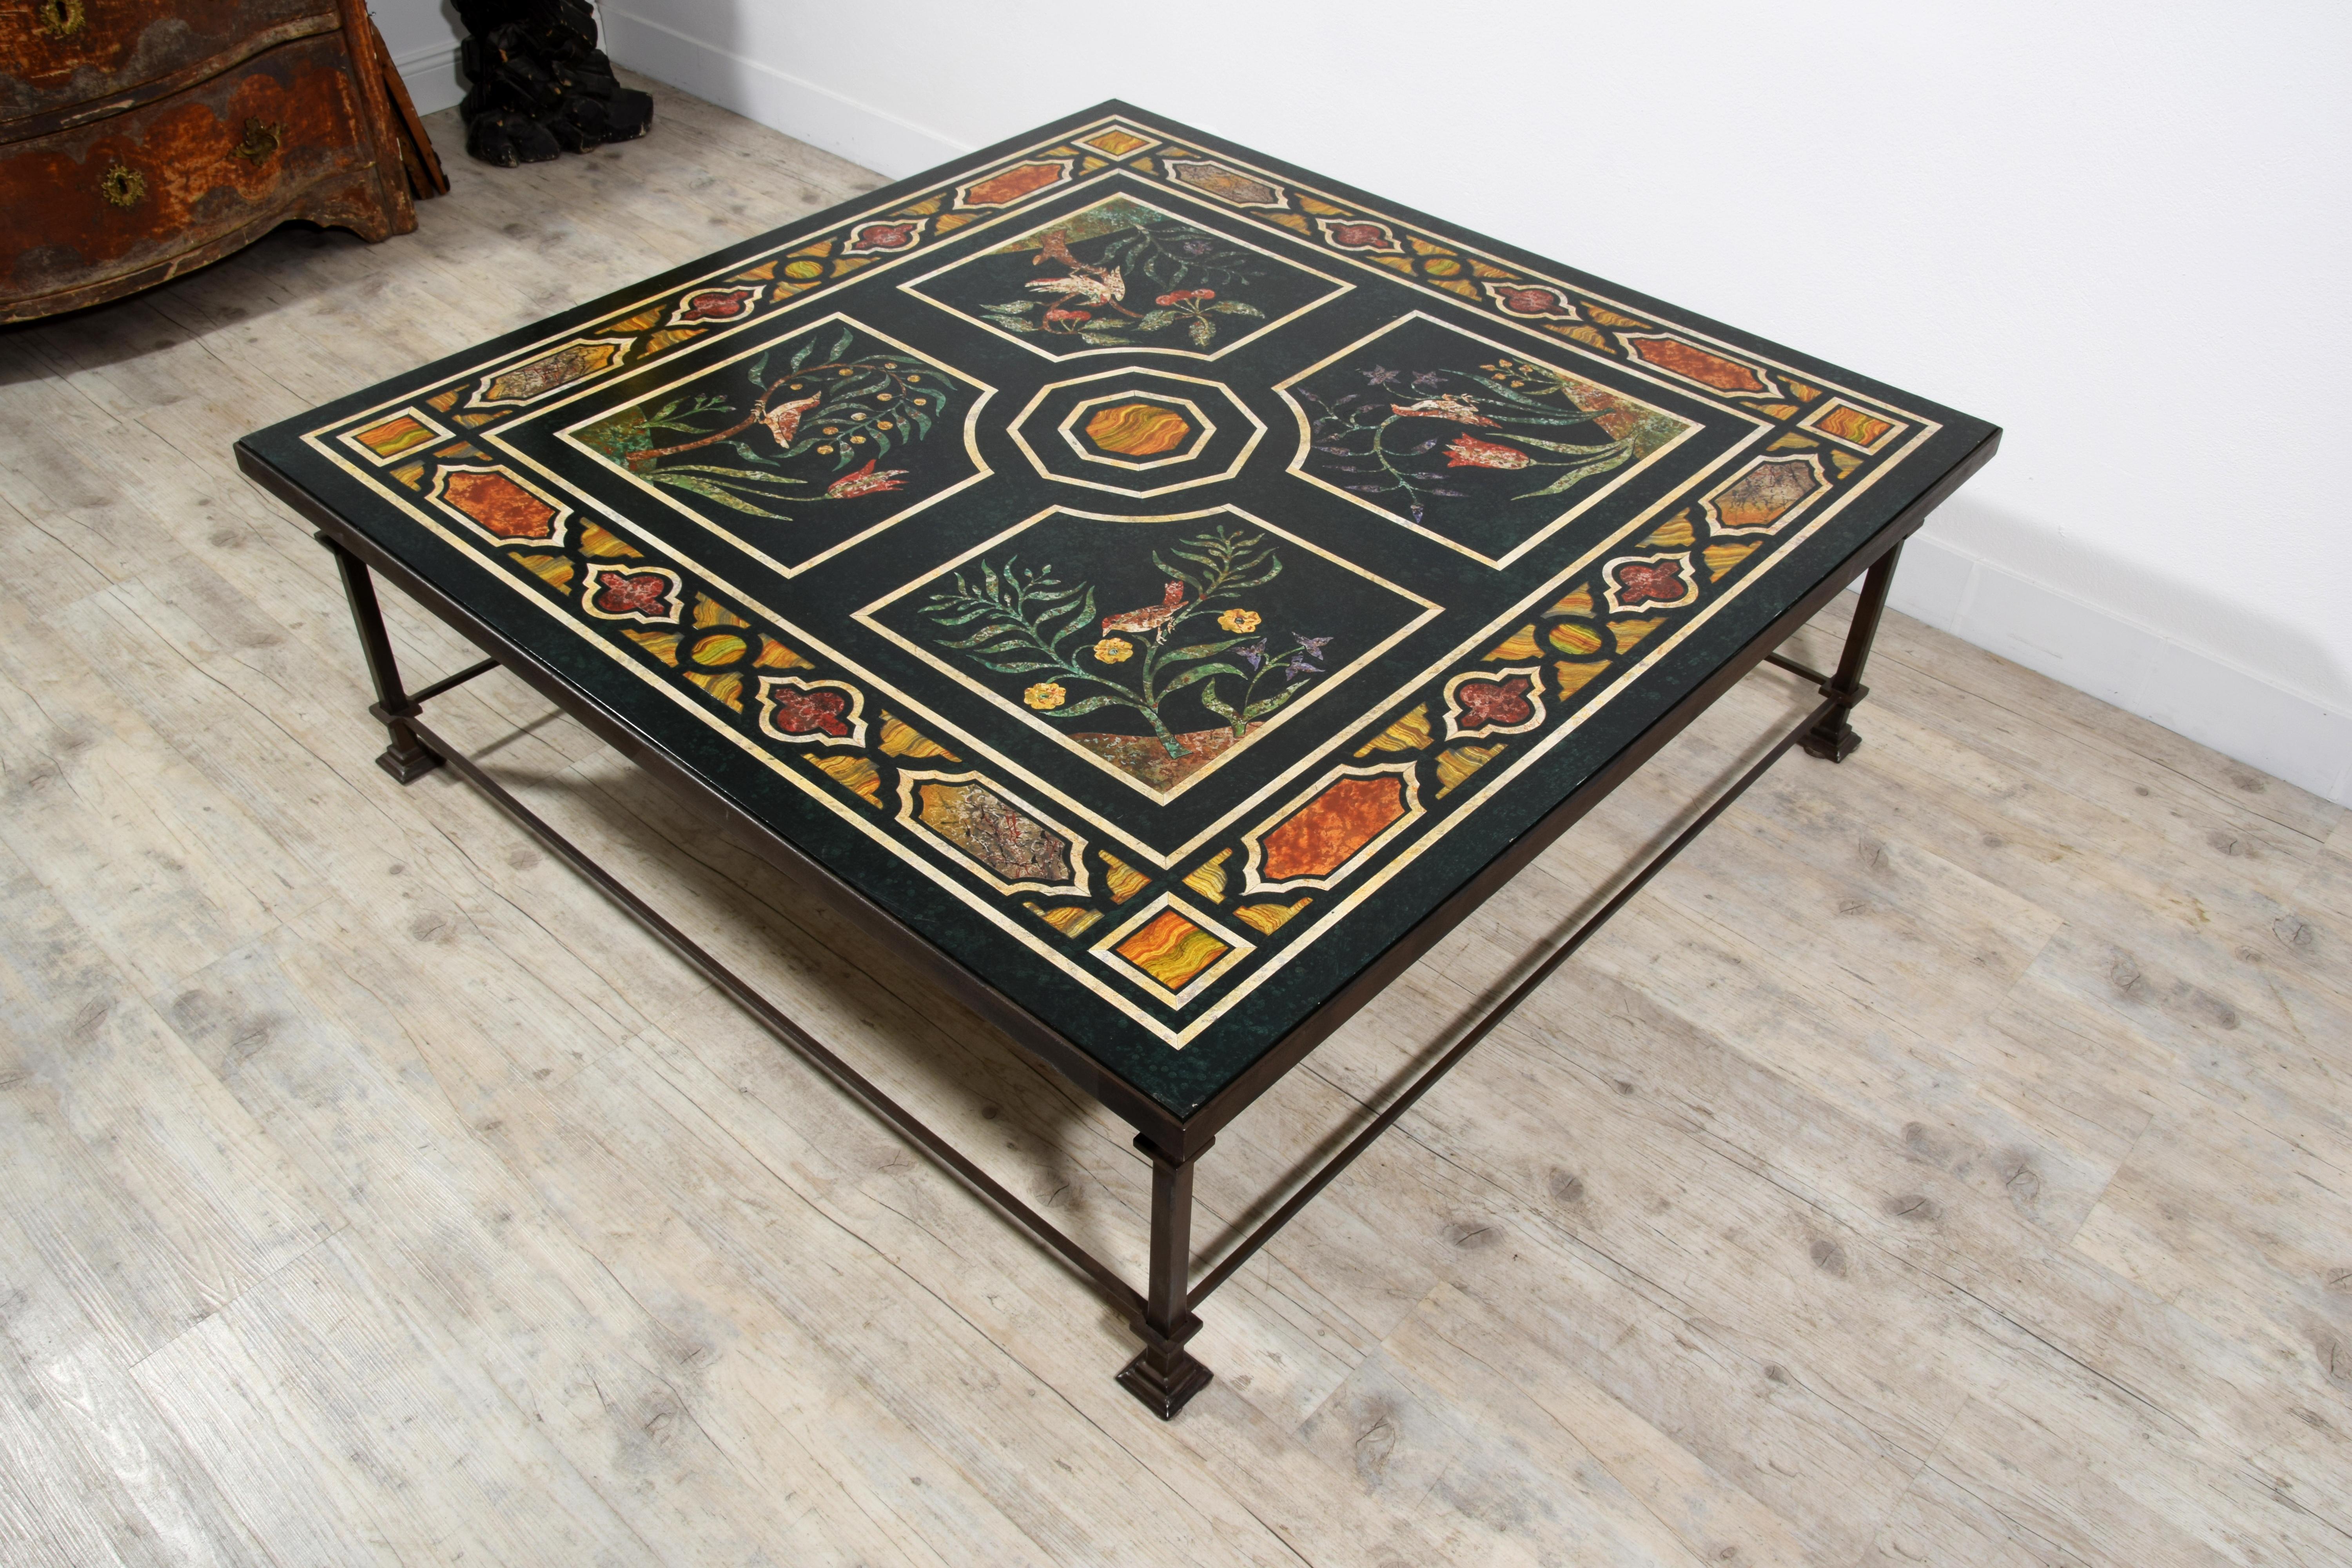  XXth Century, Tuscan Large Square Coffee Table with Lacquered Wood  For Sale 2